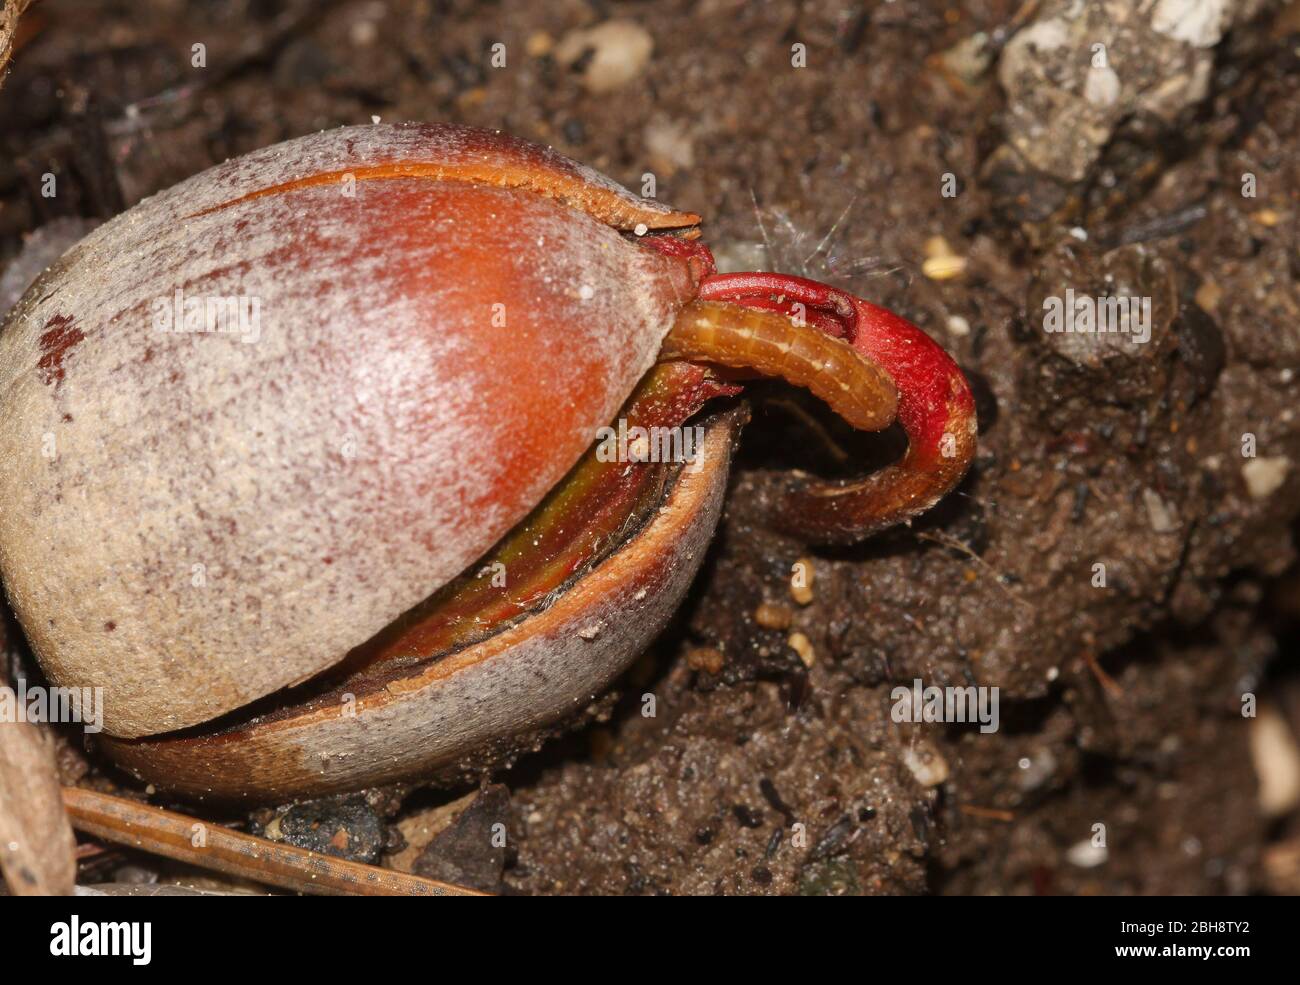 Germinating acorn of northern red oak, with brown caterpillar, Quercus rubra, on humus soil, Bavaria, Germany Stock Photo